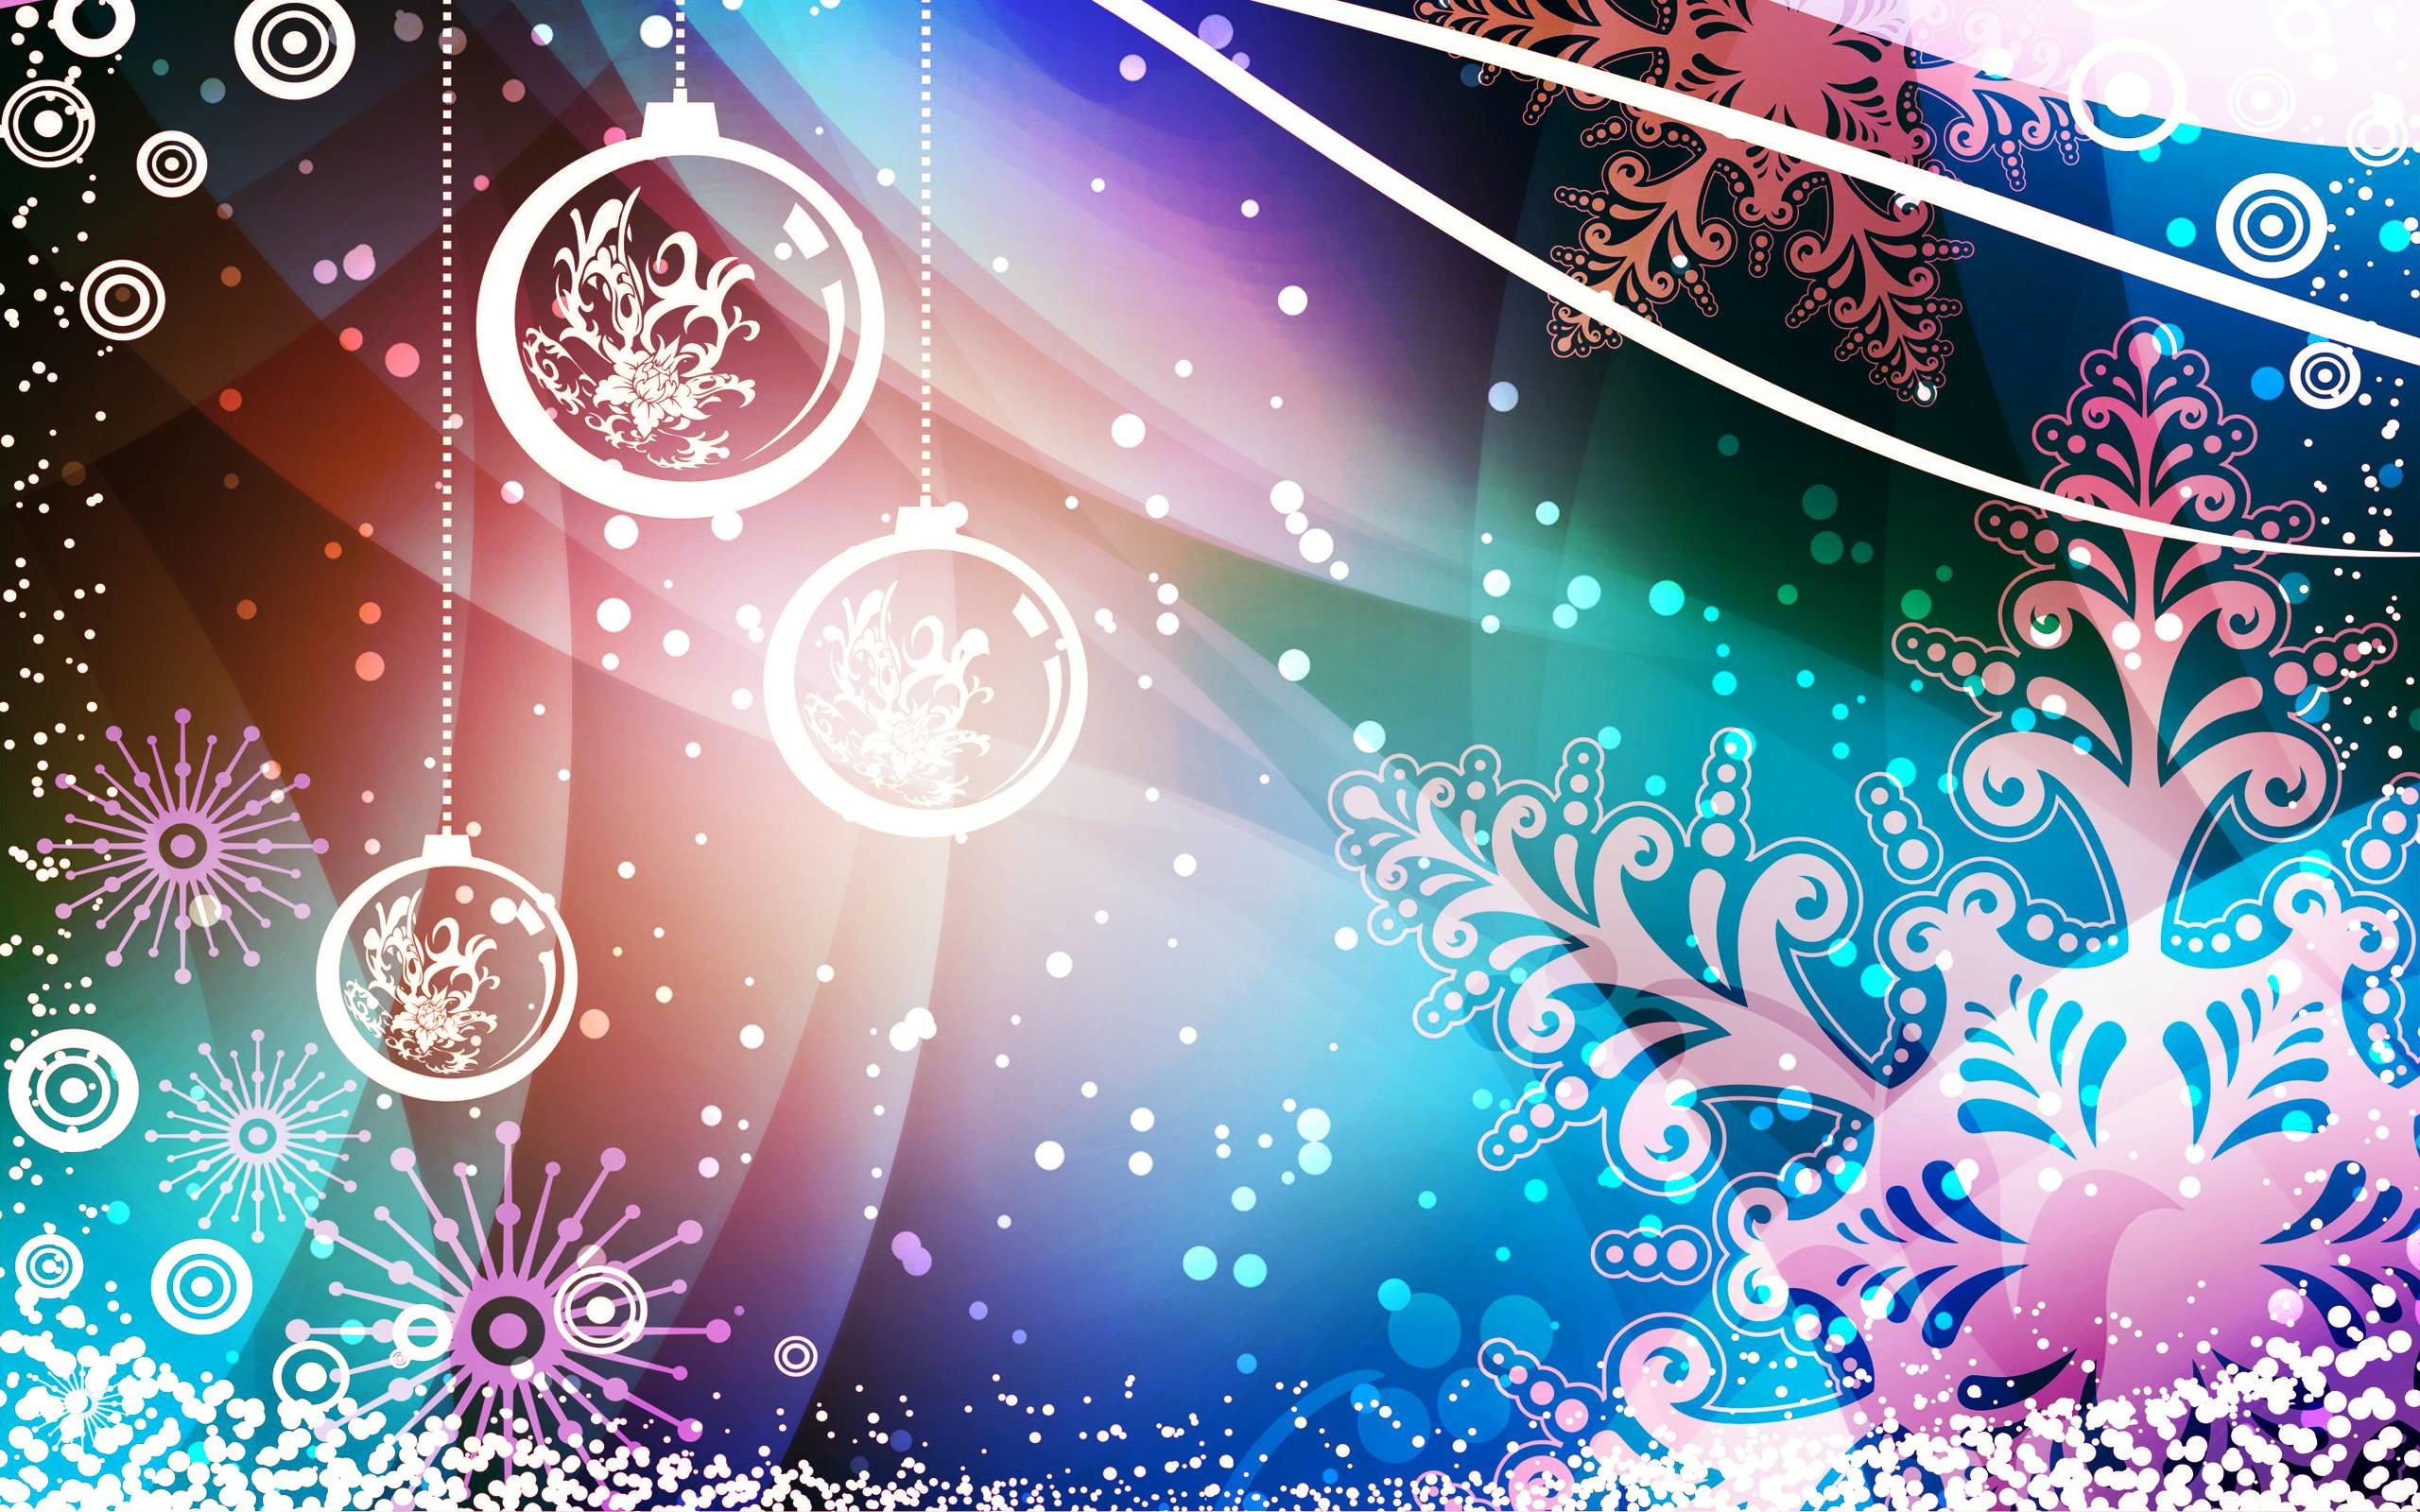 2560x1600 Christmas Wallpaper Backgrounds 18470 Hd Wallpapers in .